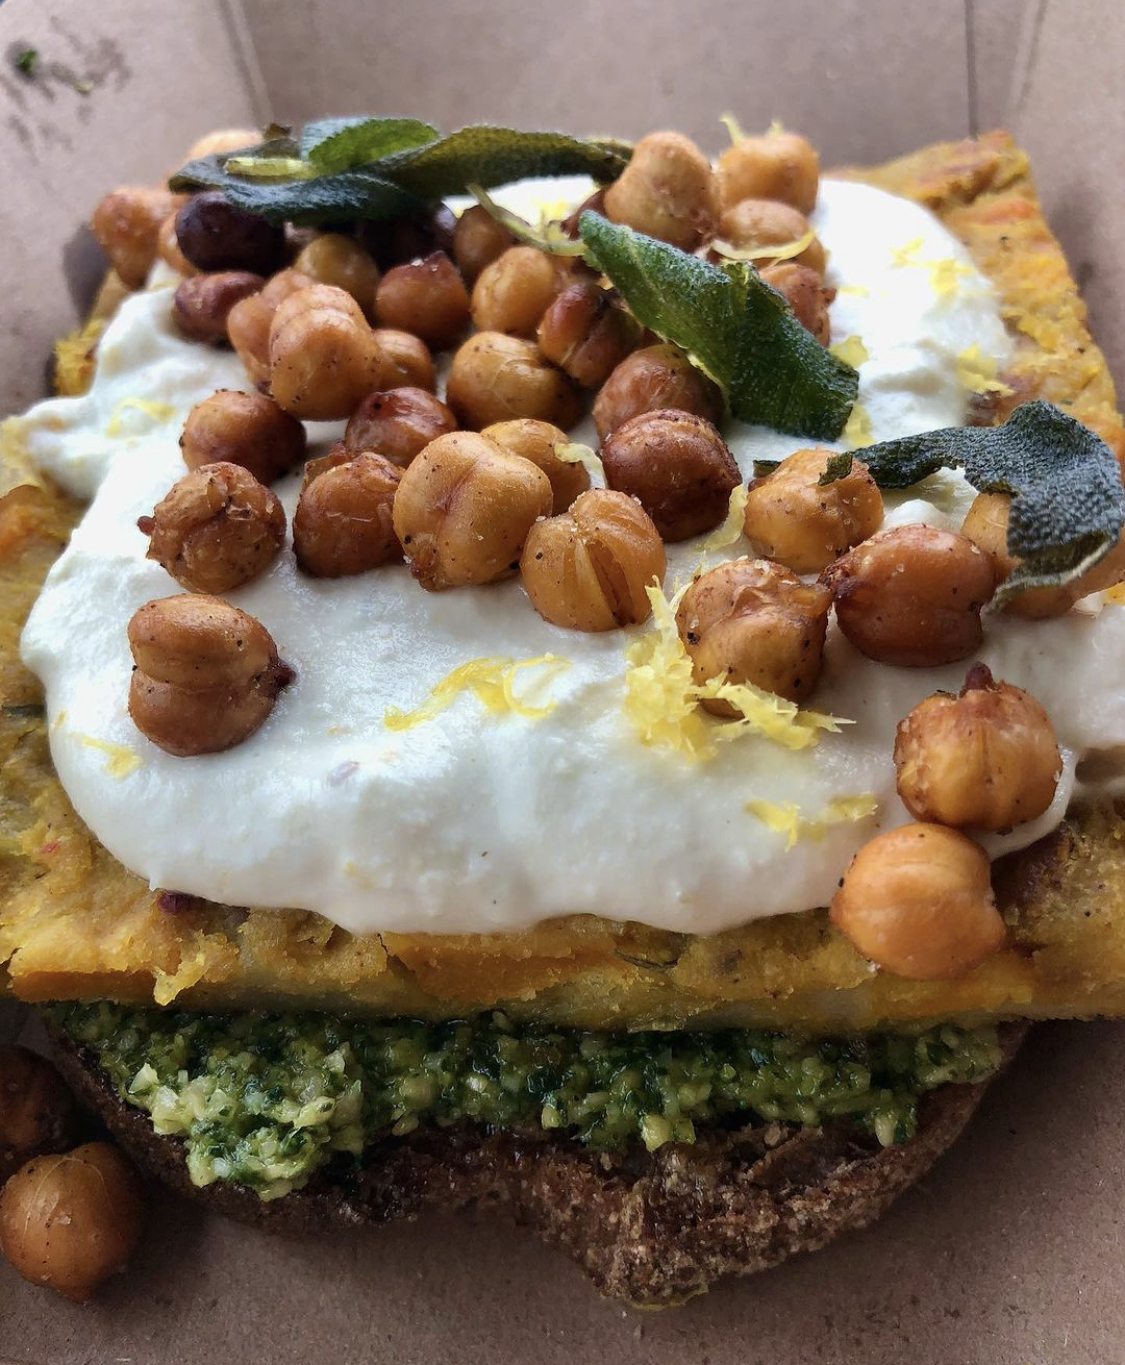 roasted chickpeas on top of a white, creamy layer, on top of a layer of somethng yellow and sliced on top of a layer of pesto on top of a rustic bread. The dish is garnished with lemon zest and sage leaves. 